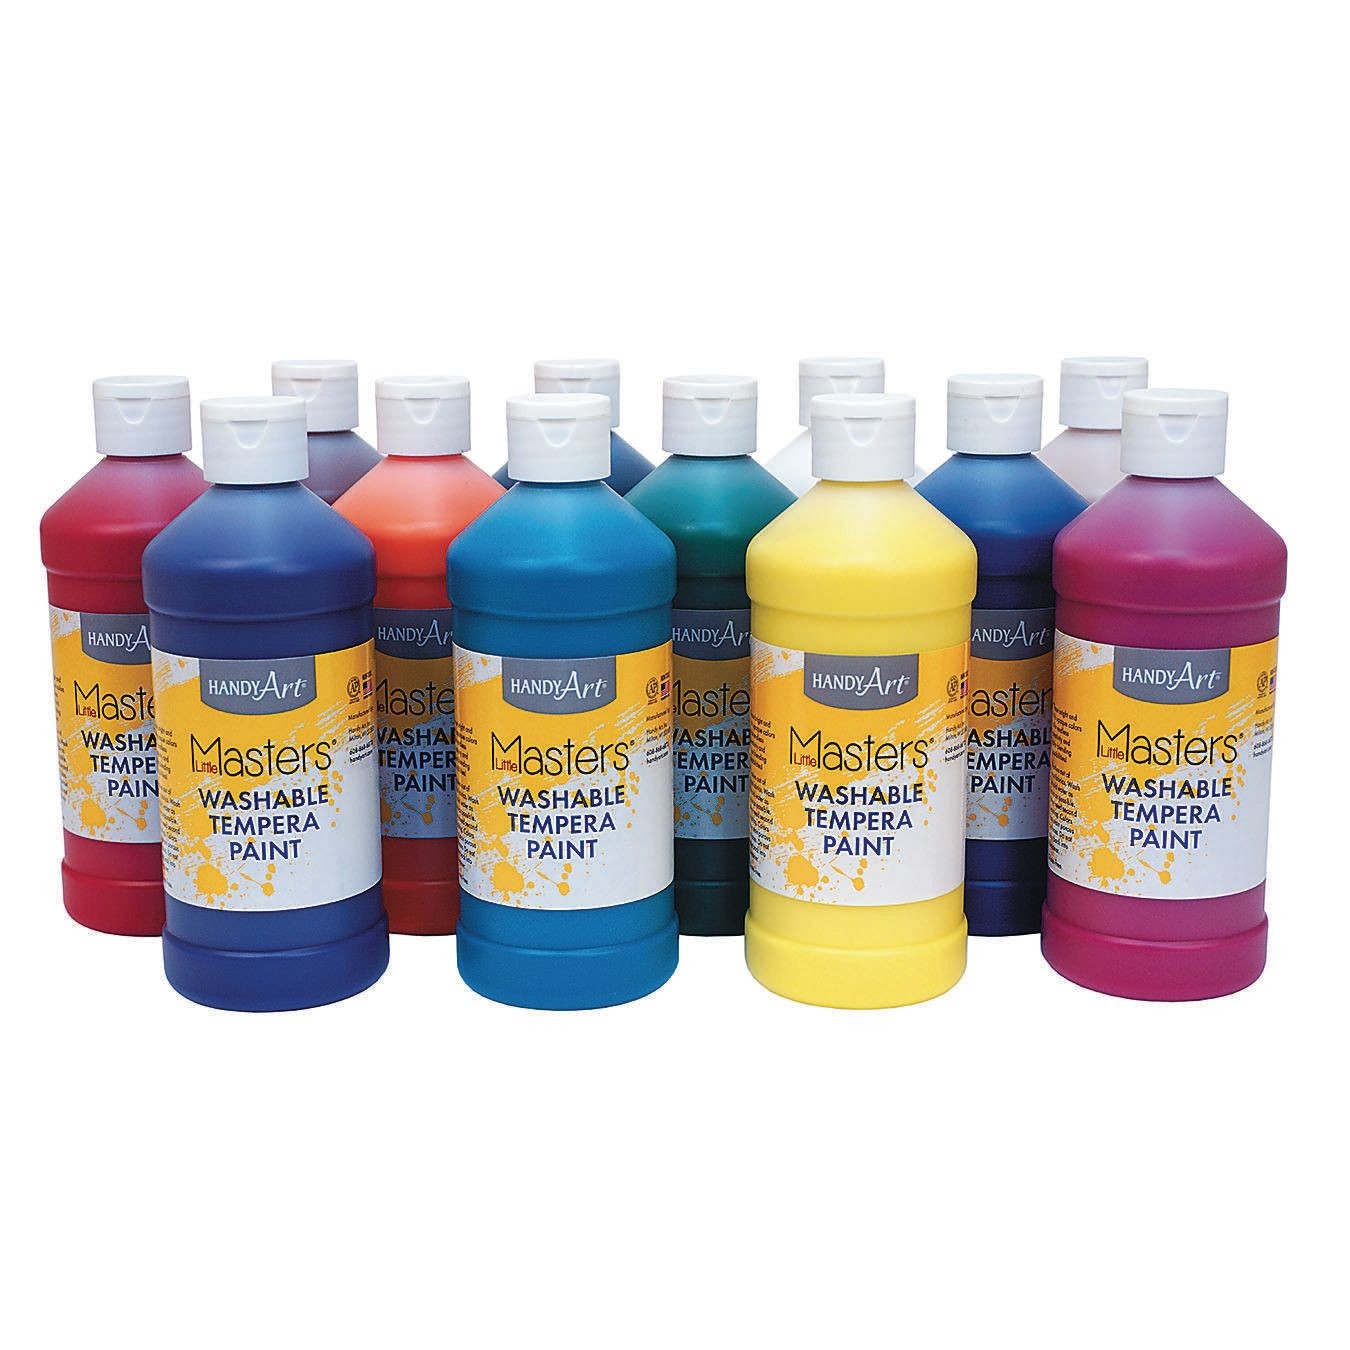 Handy Art® Little Masters™ Washable Tempera Paint, Gallon, White, Pack of 2